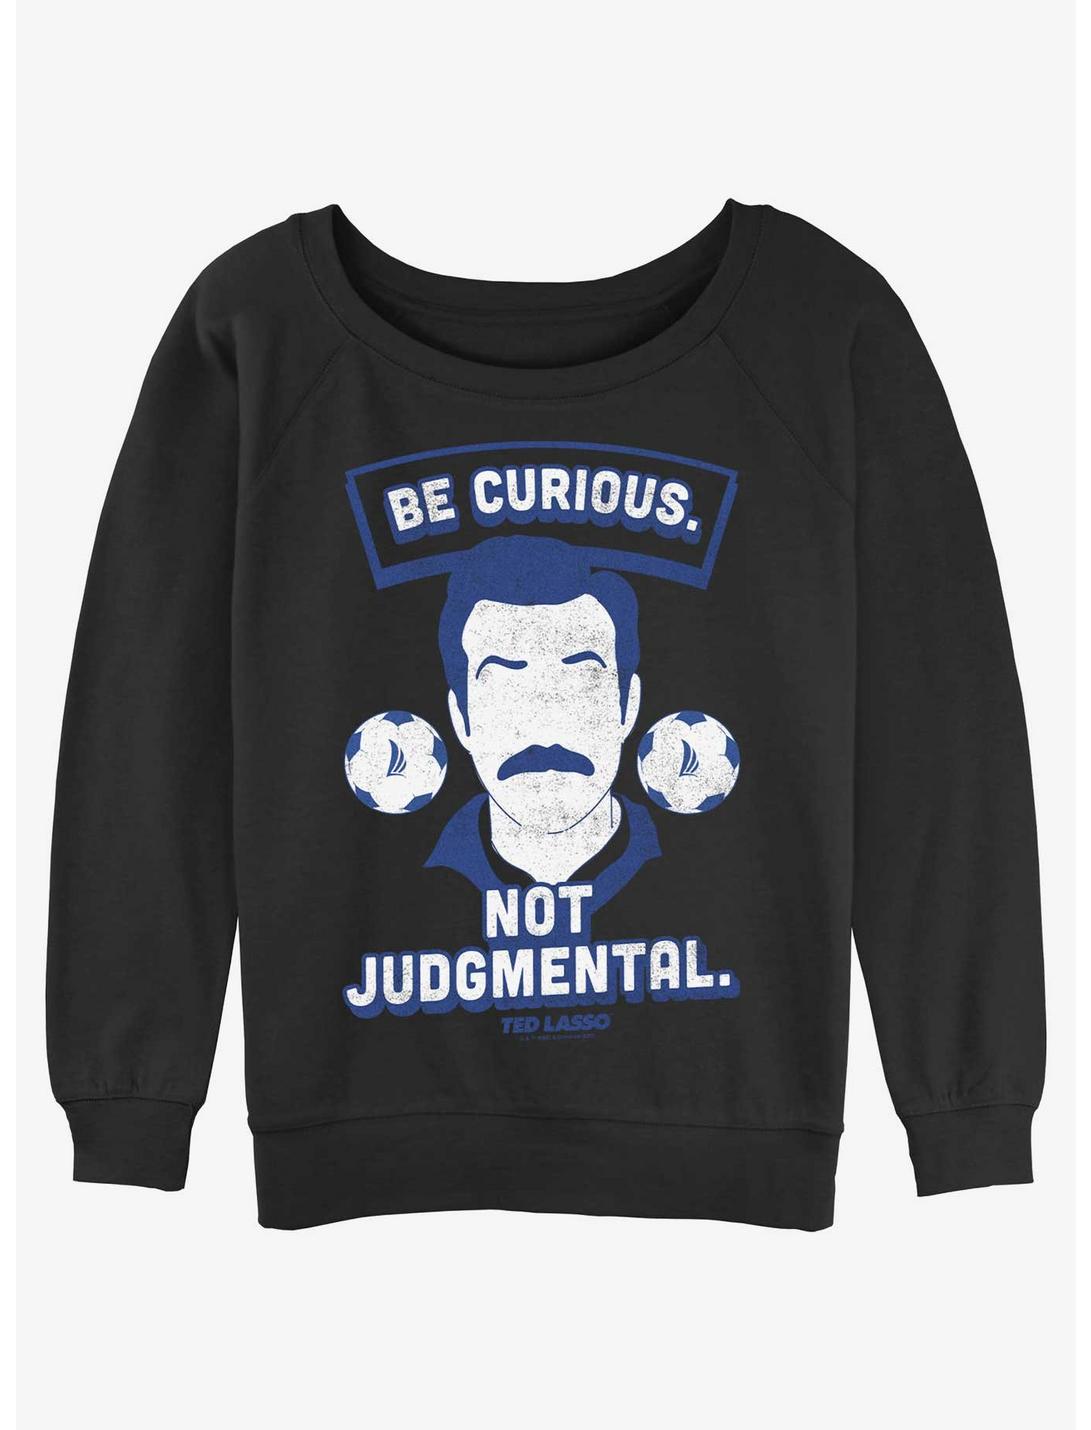 Ted Lasso Be Curious Girls Slouchy Sweatshirt, BLACK, hi-res